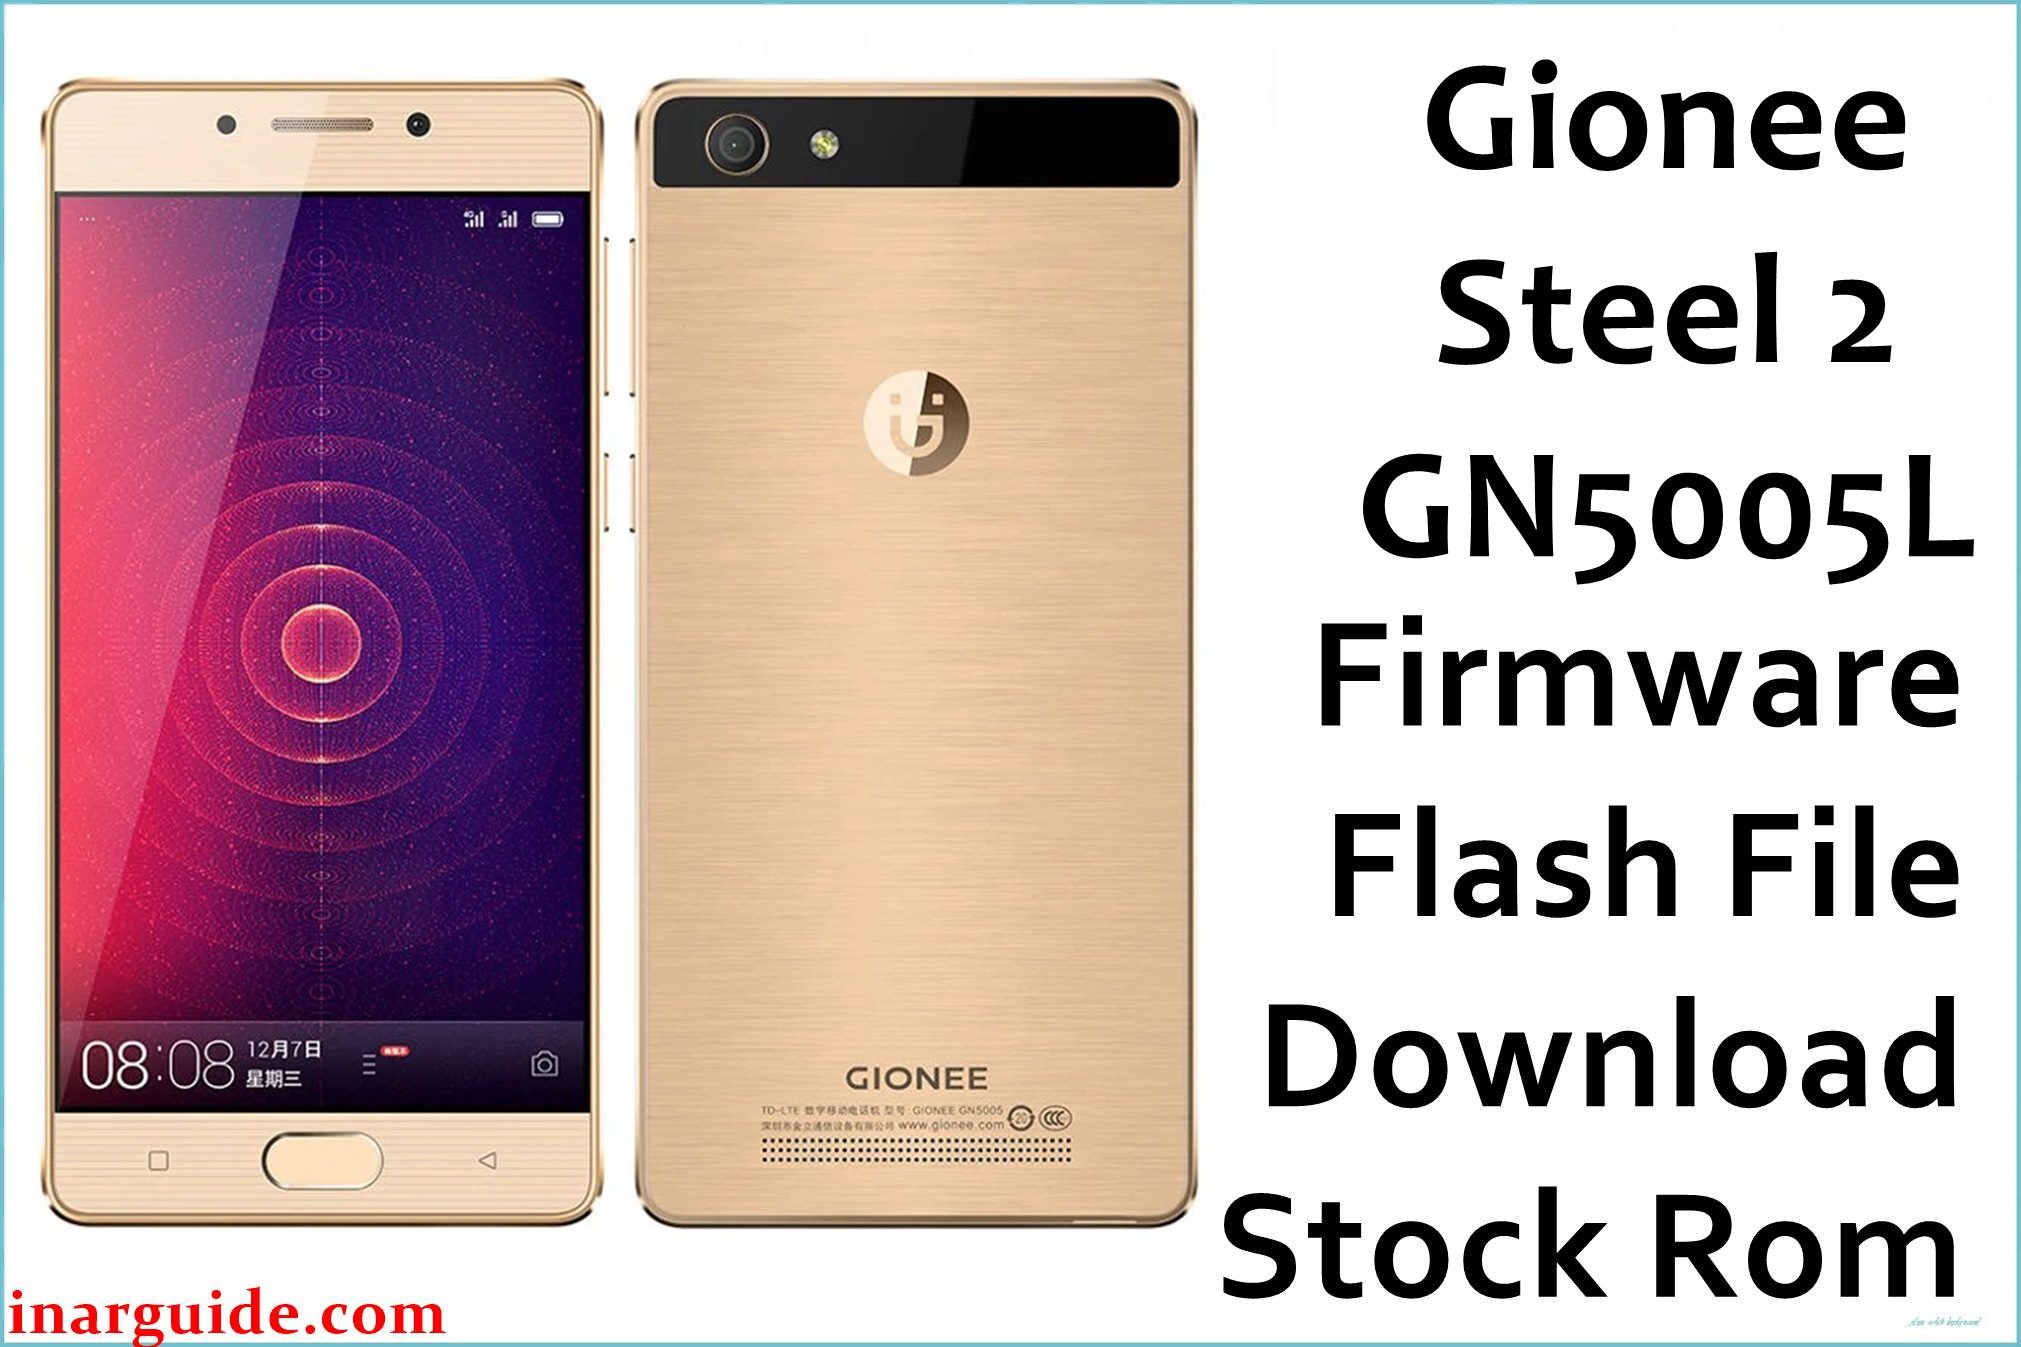 Gionee Steel 2 GN5005L